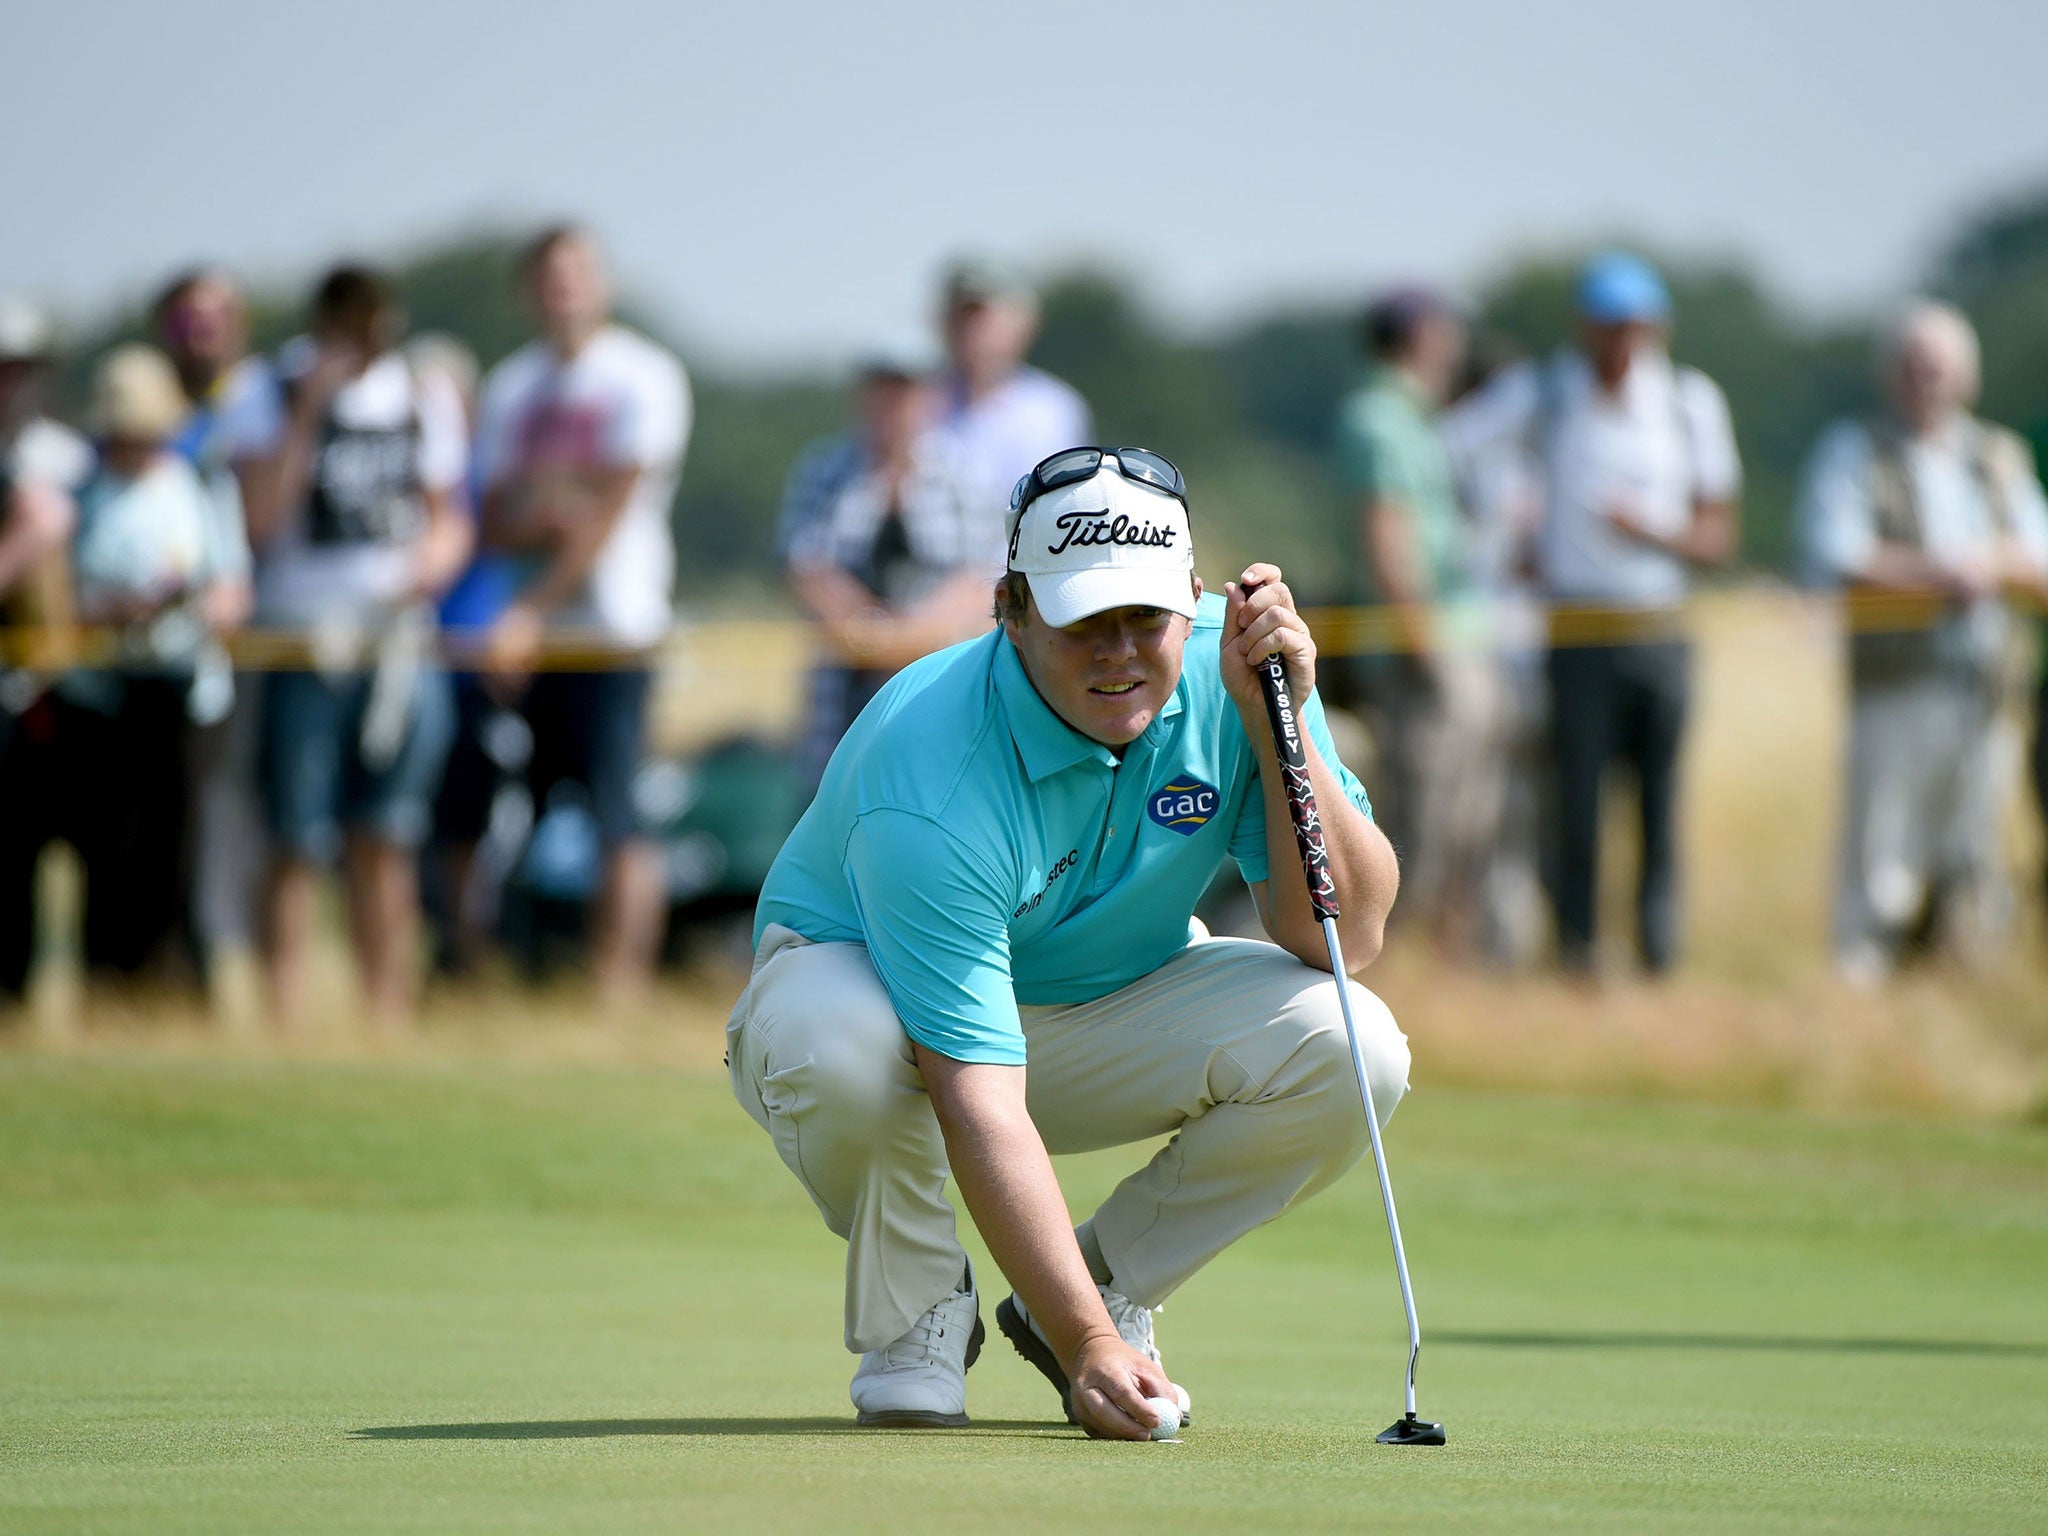 George Coetzee is hoping for some Liverpool season tickets if he wins The Open